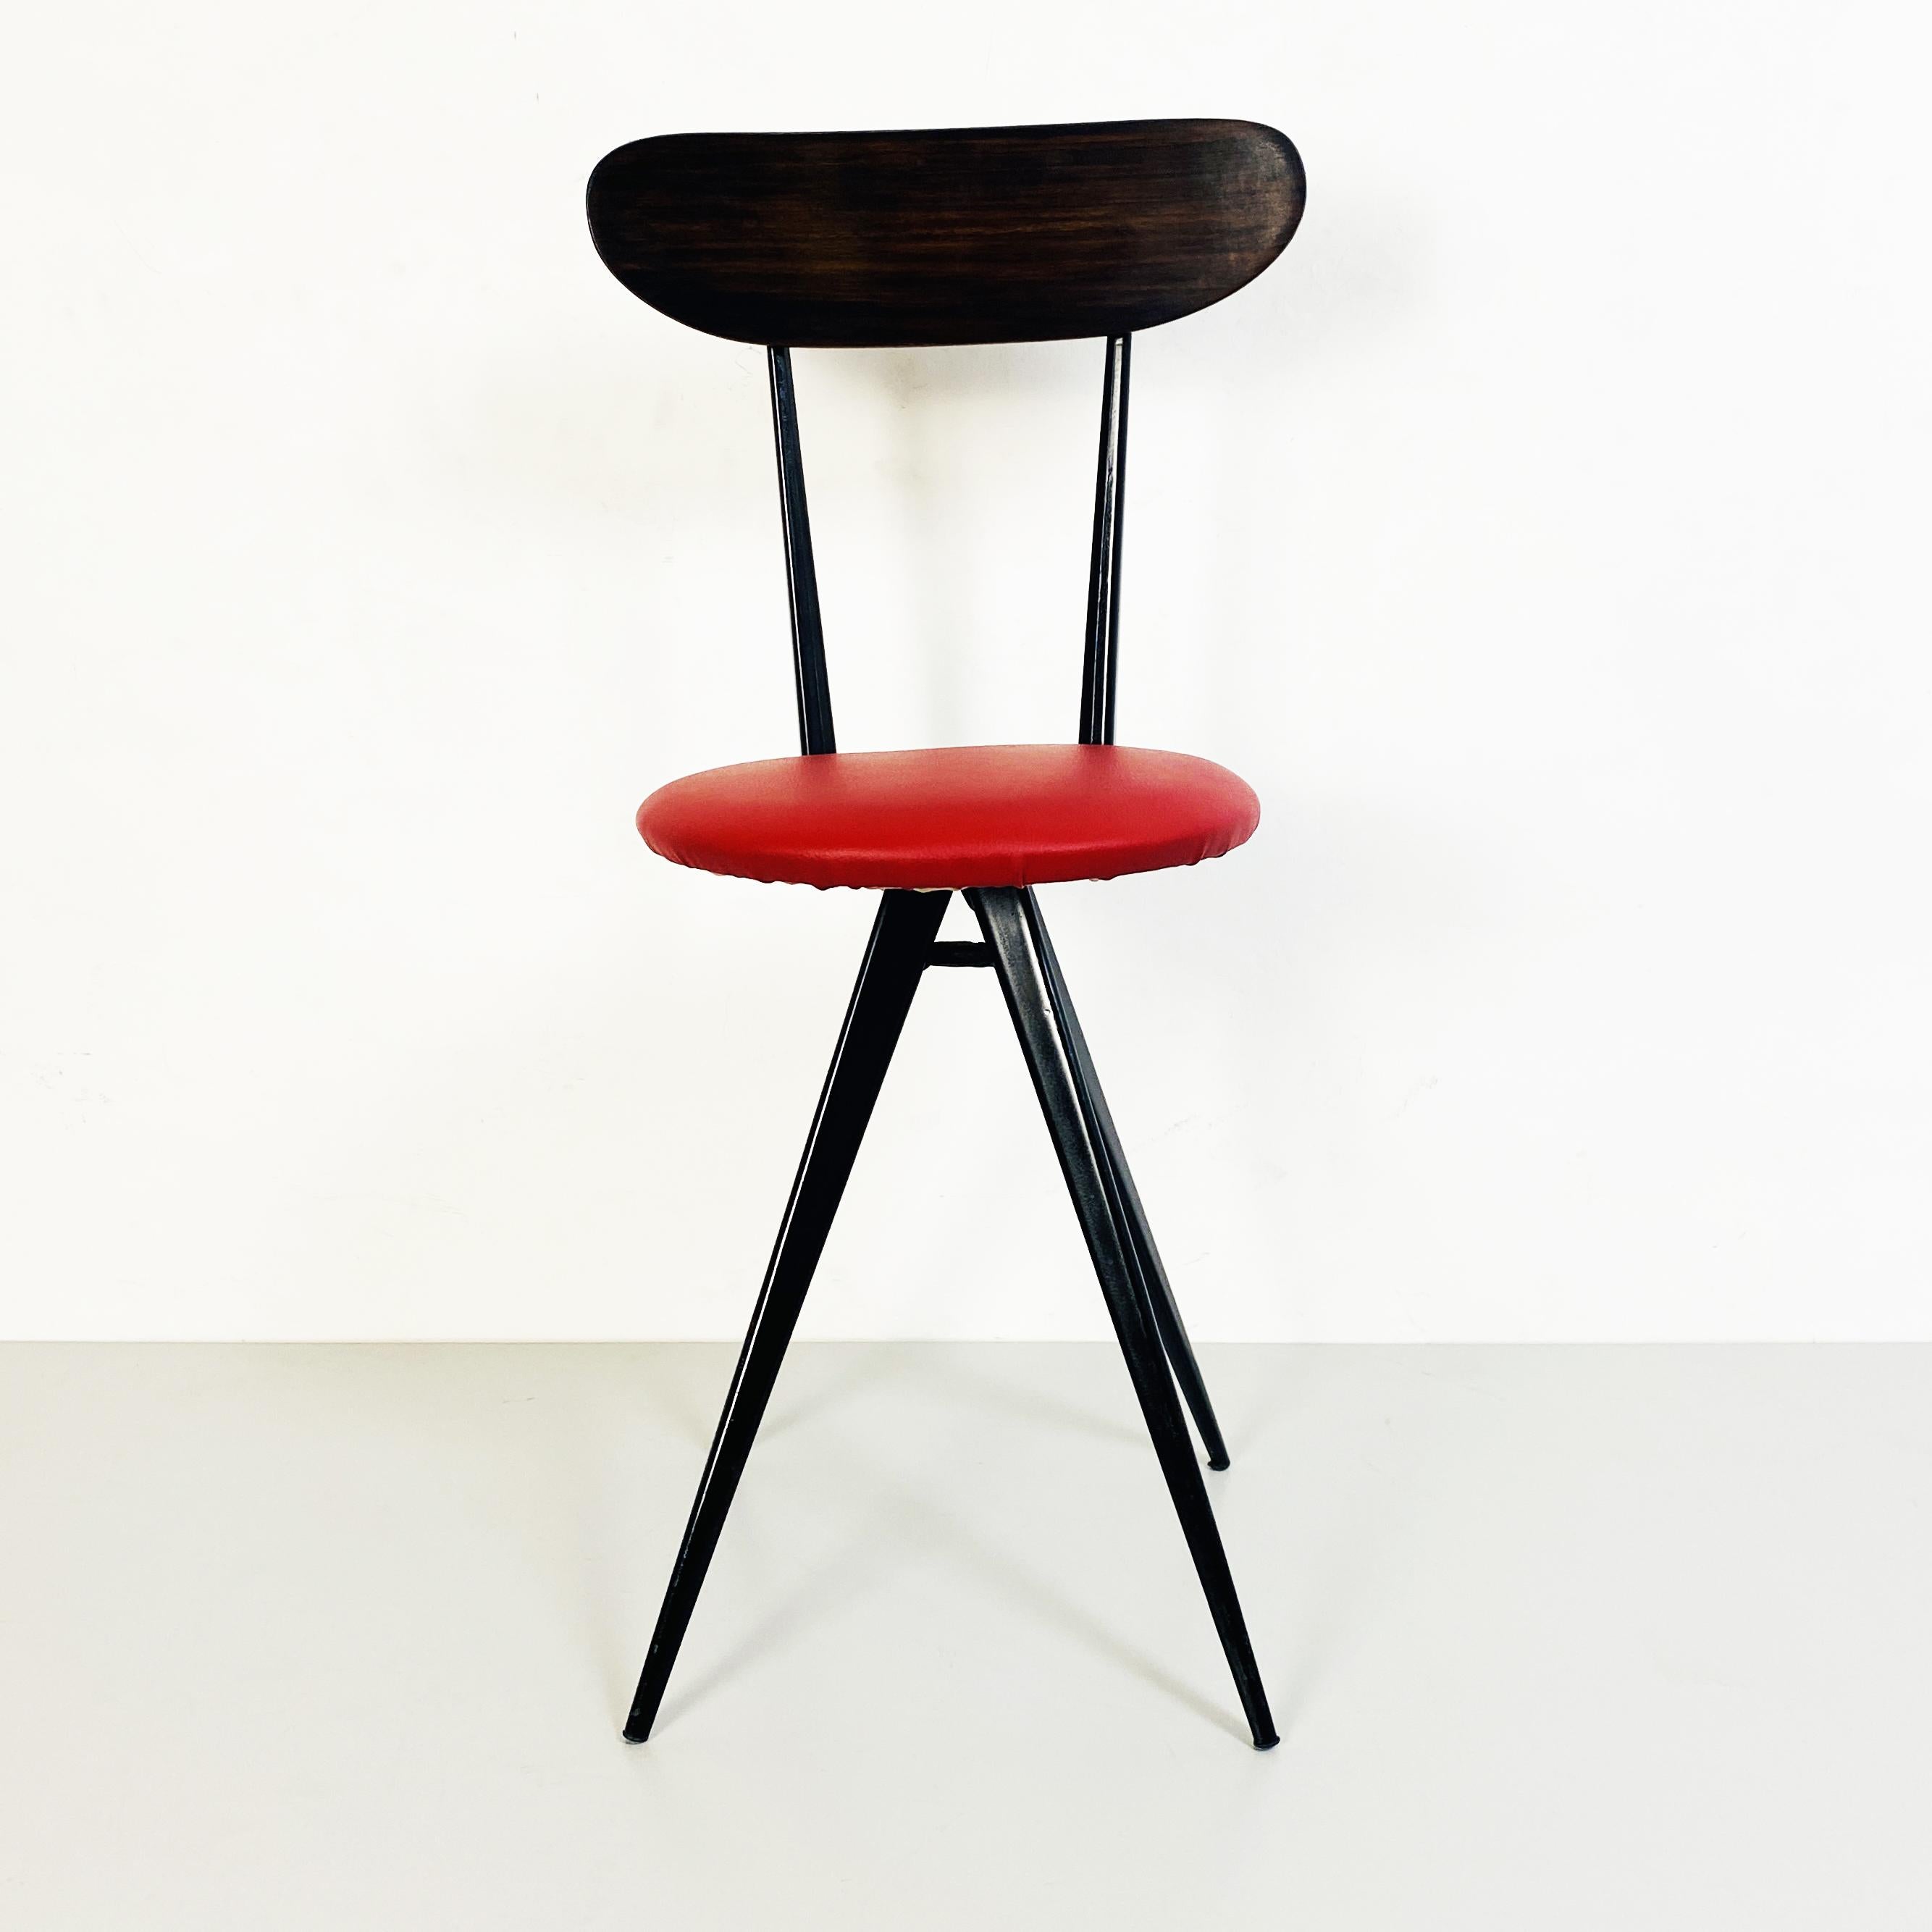 Mid-20th Century Italian Mid-Century Chair with Red Sky Seat, Metal and Wooded Structure, 1960s